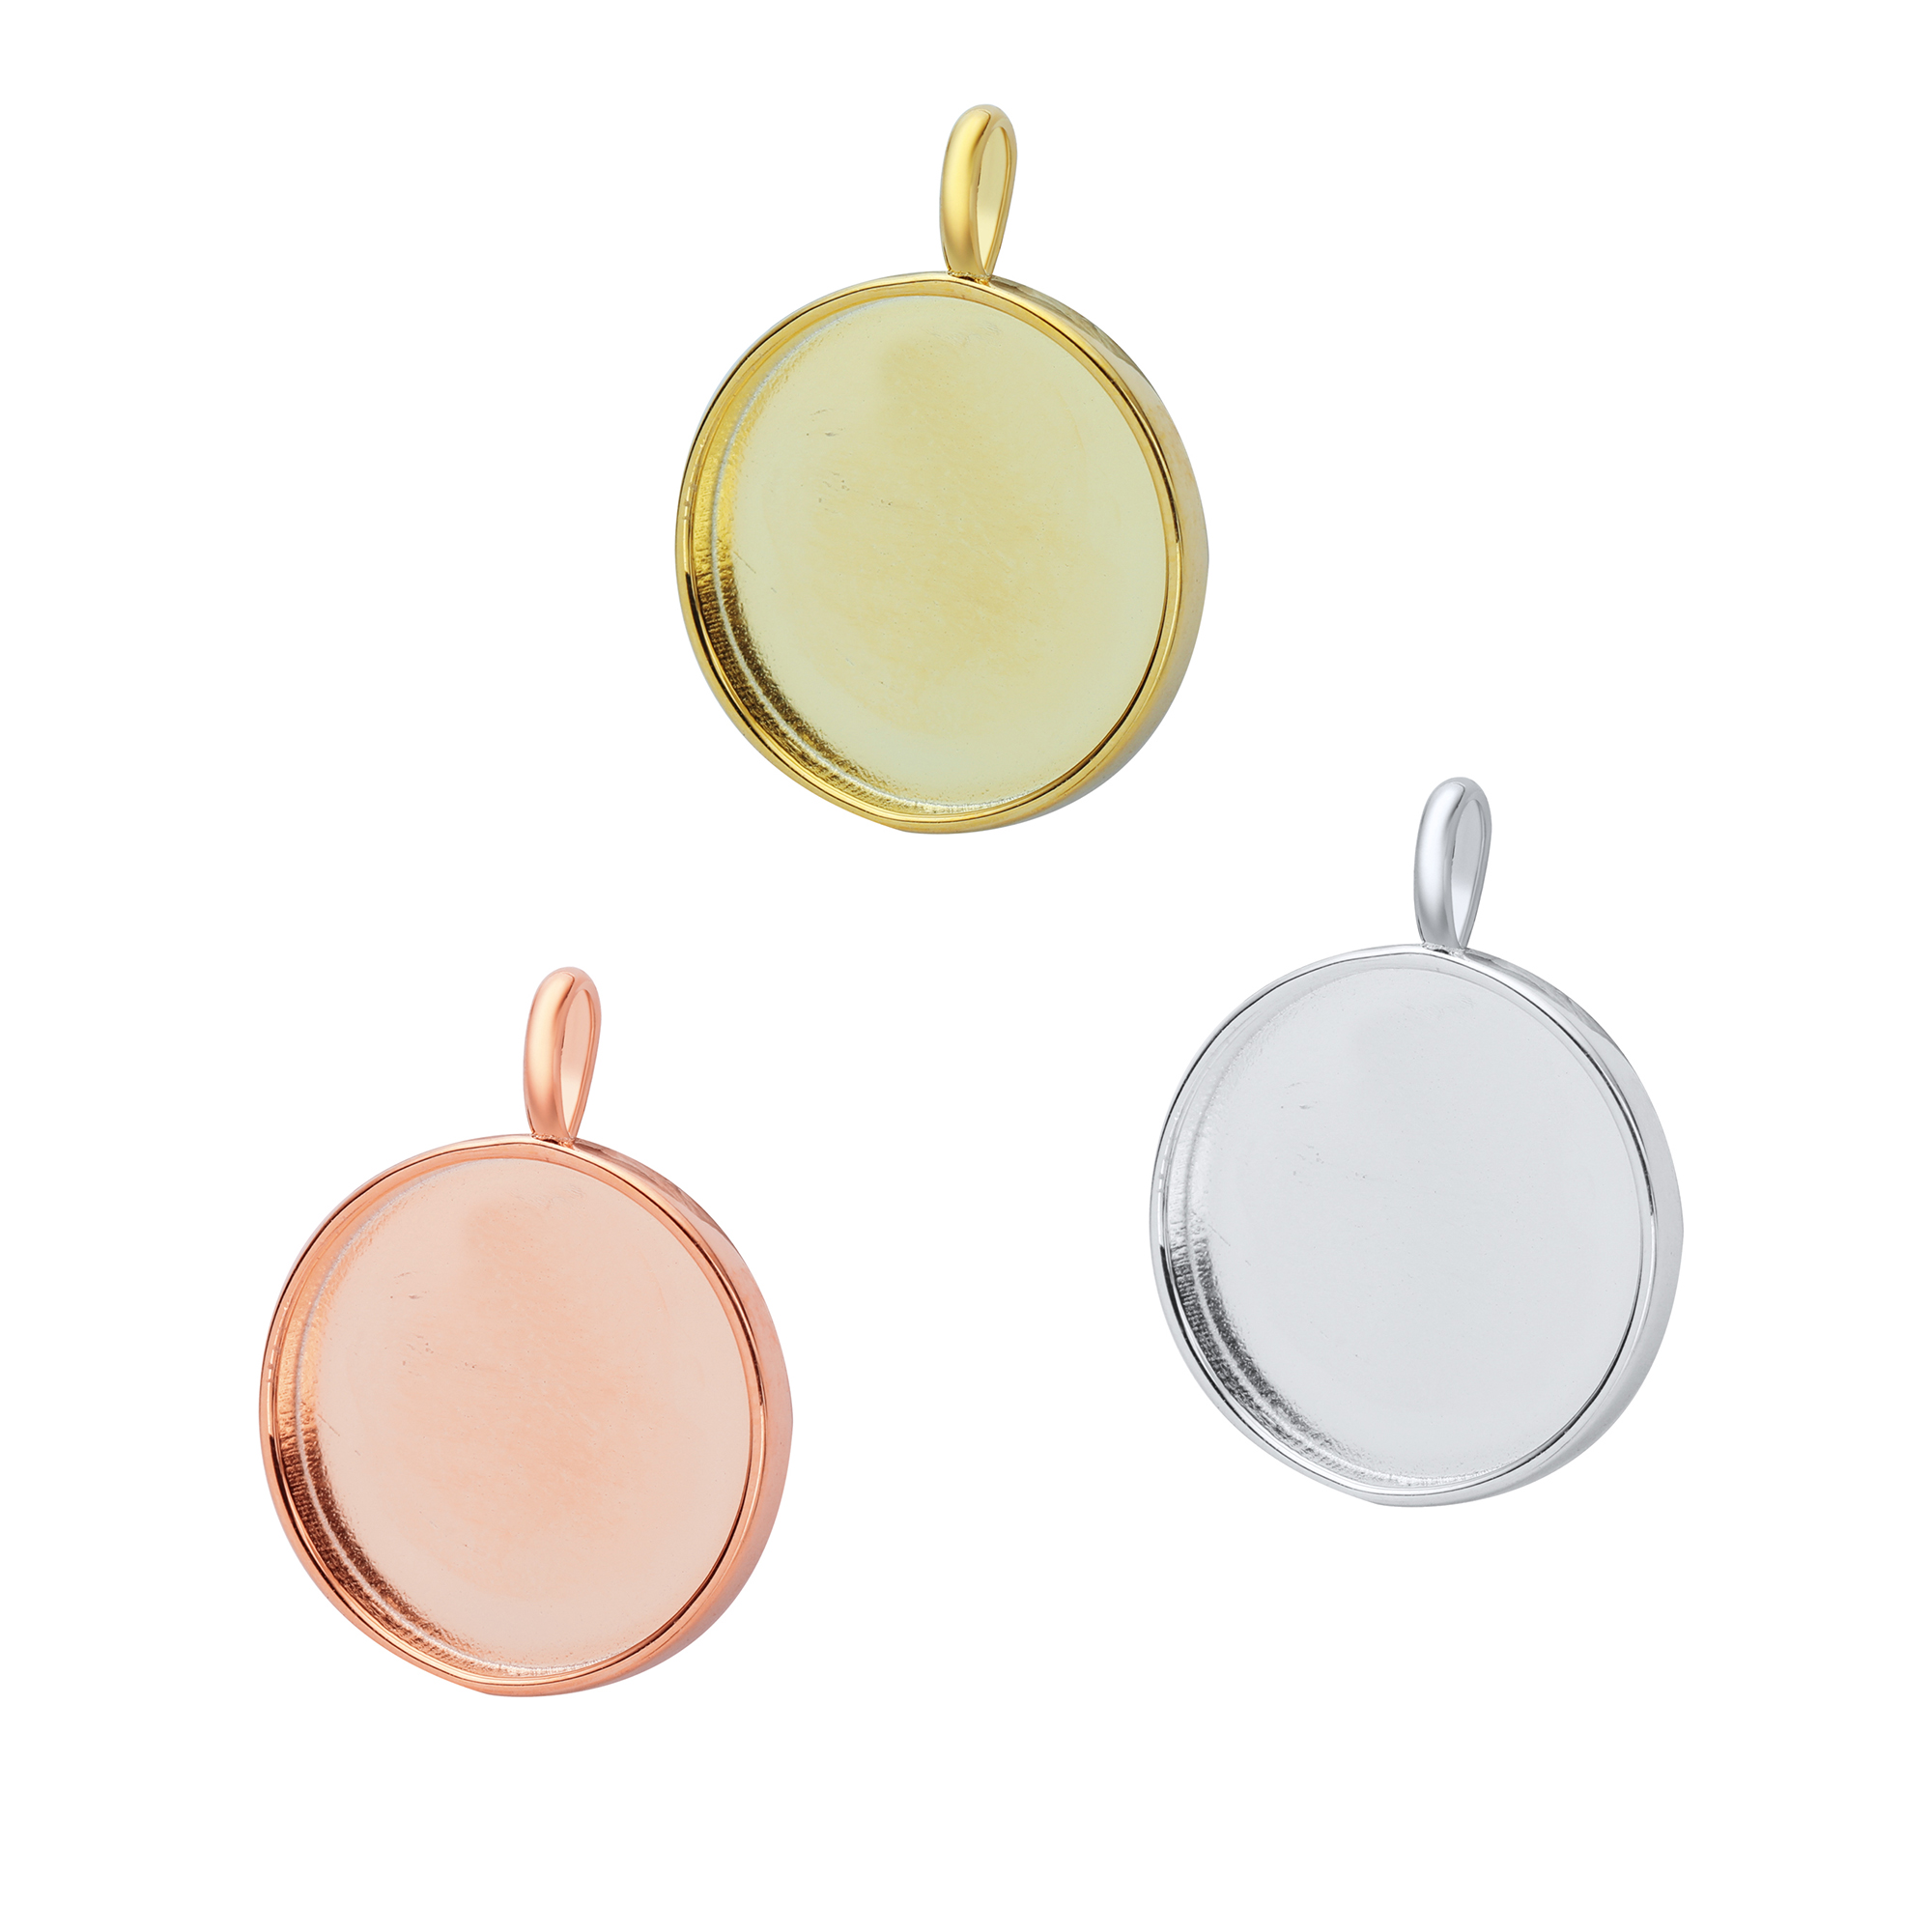 Keepsake Breast Milk Resin Round Solid Back Pendant Bezel Settings,Solid 925 Sterling Silver Rose Gold Plated Pendant,DIY Memory Jewelry 1411335 - Click Image to Close